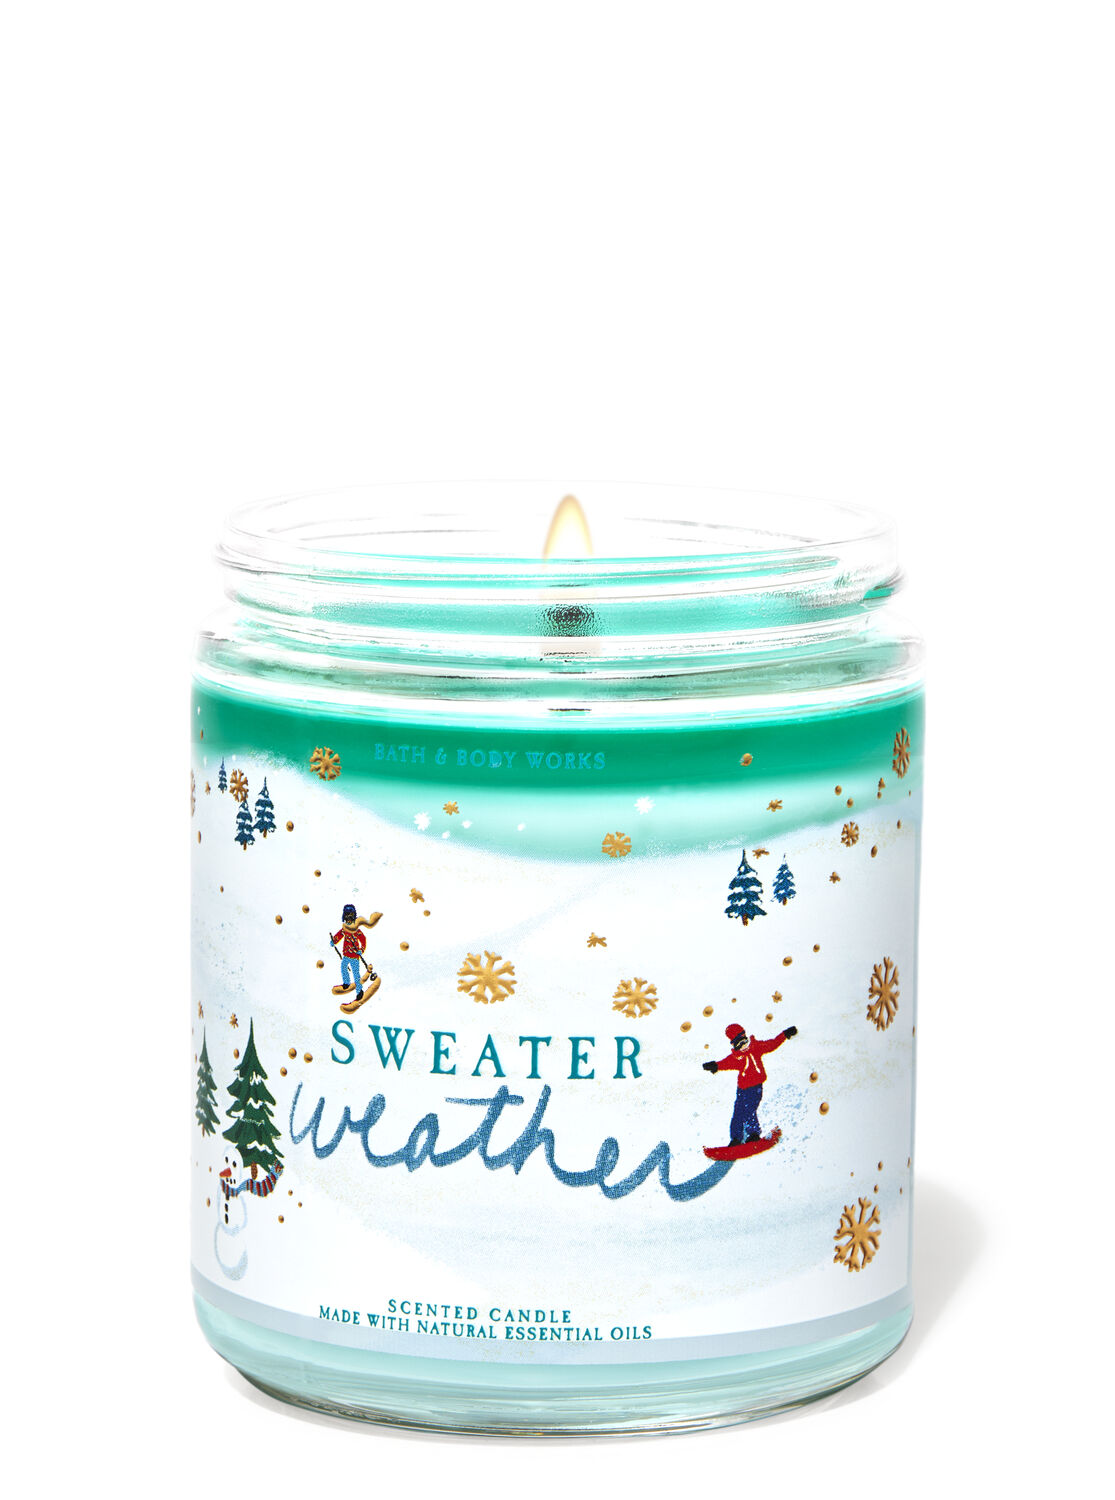 Sweater Weather Single Wick Candle